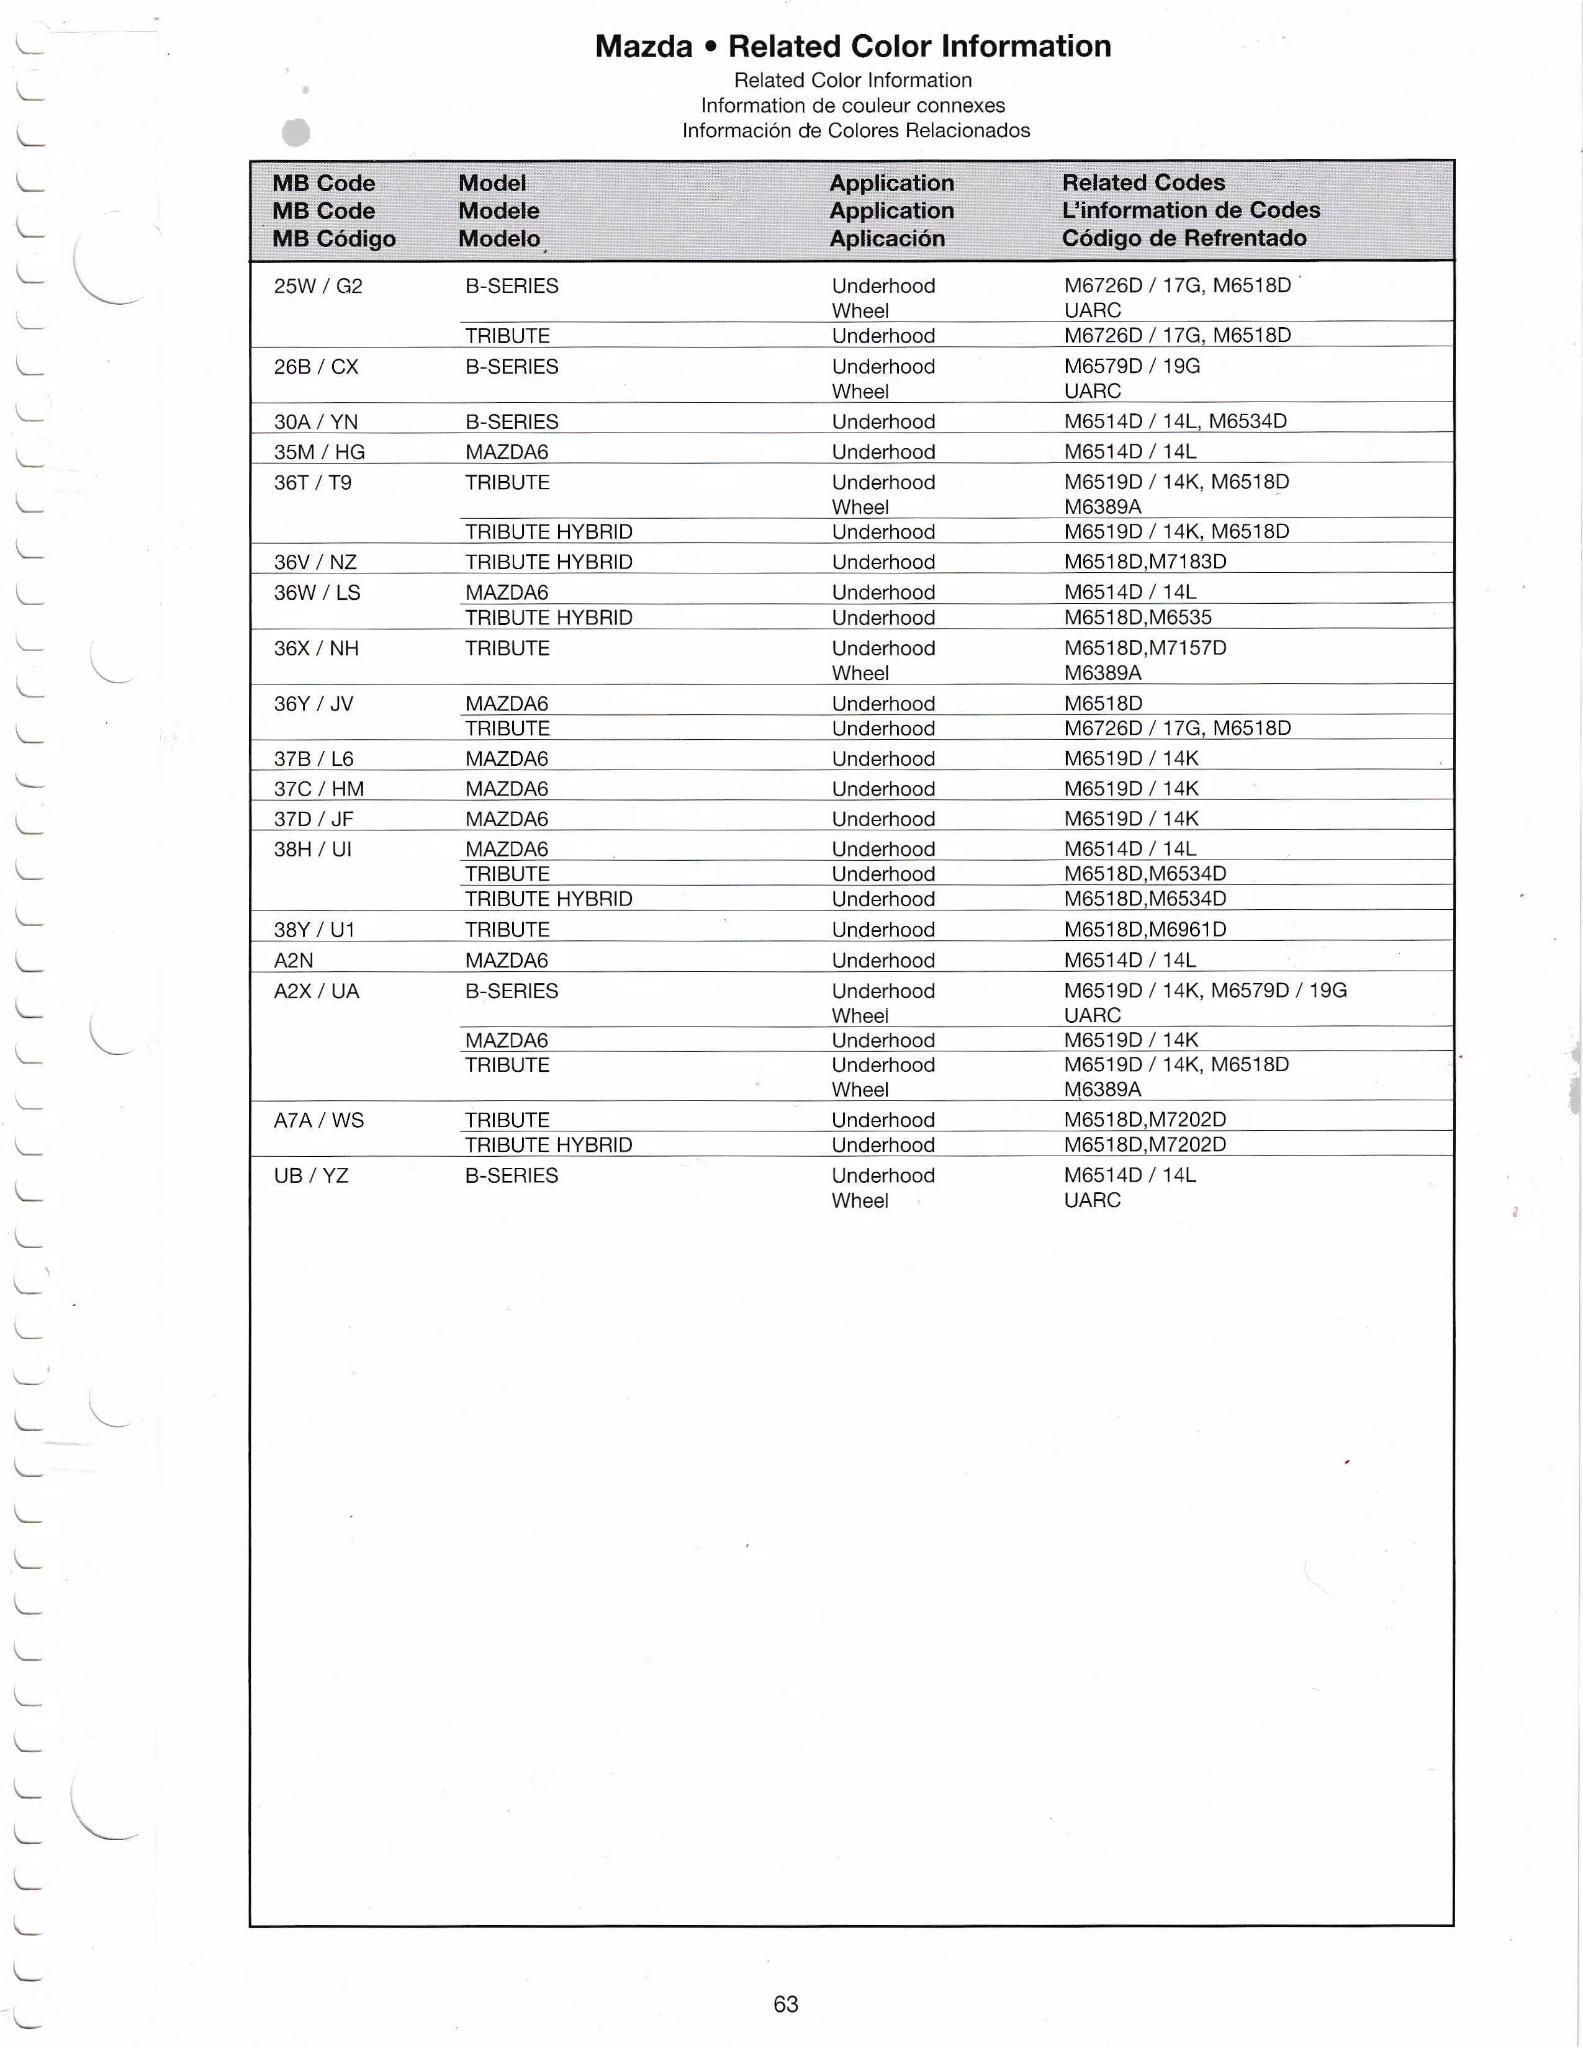 2009 Mazda models to accent and underhood list paint codes.